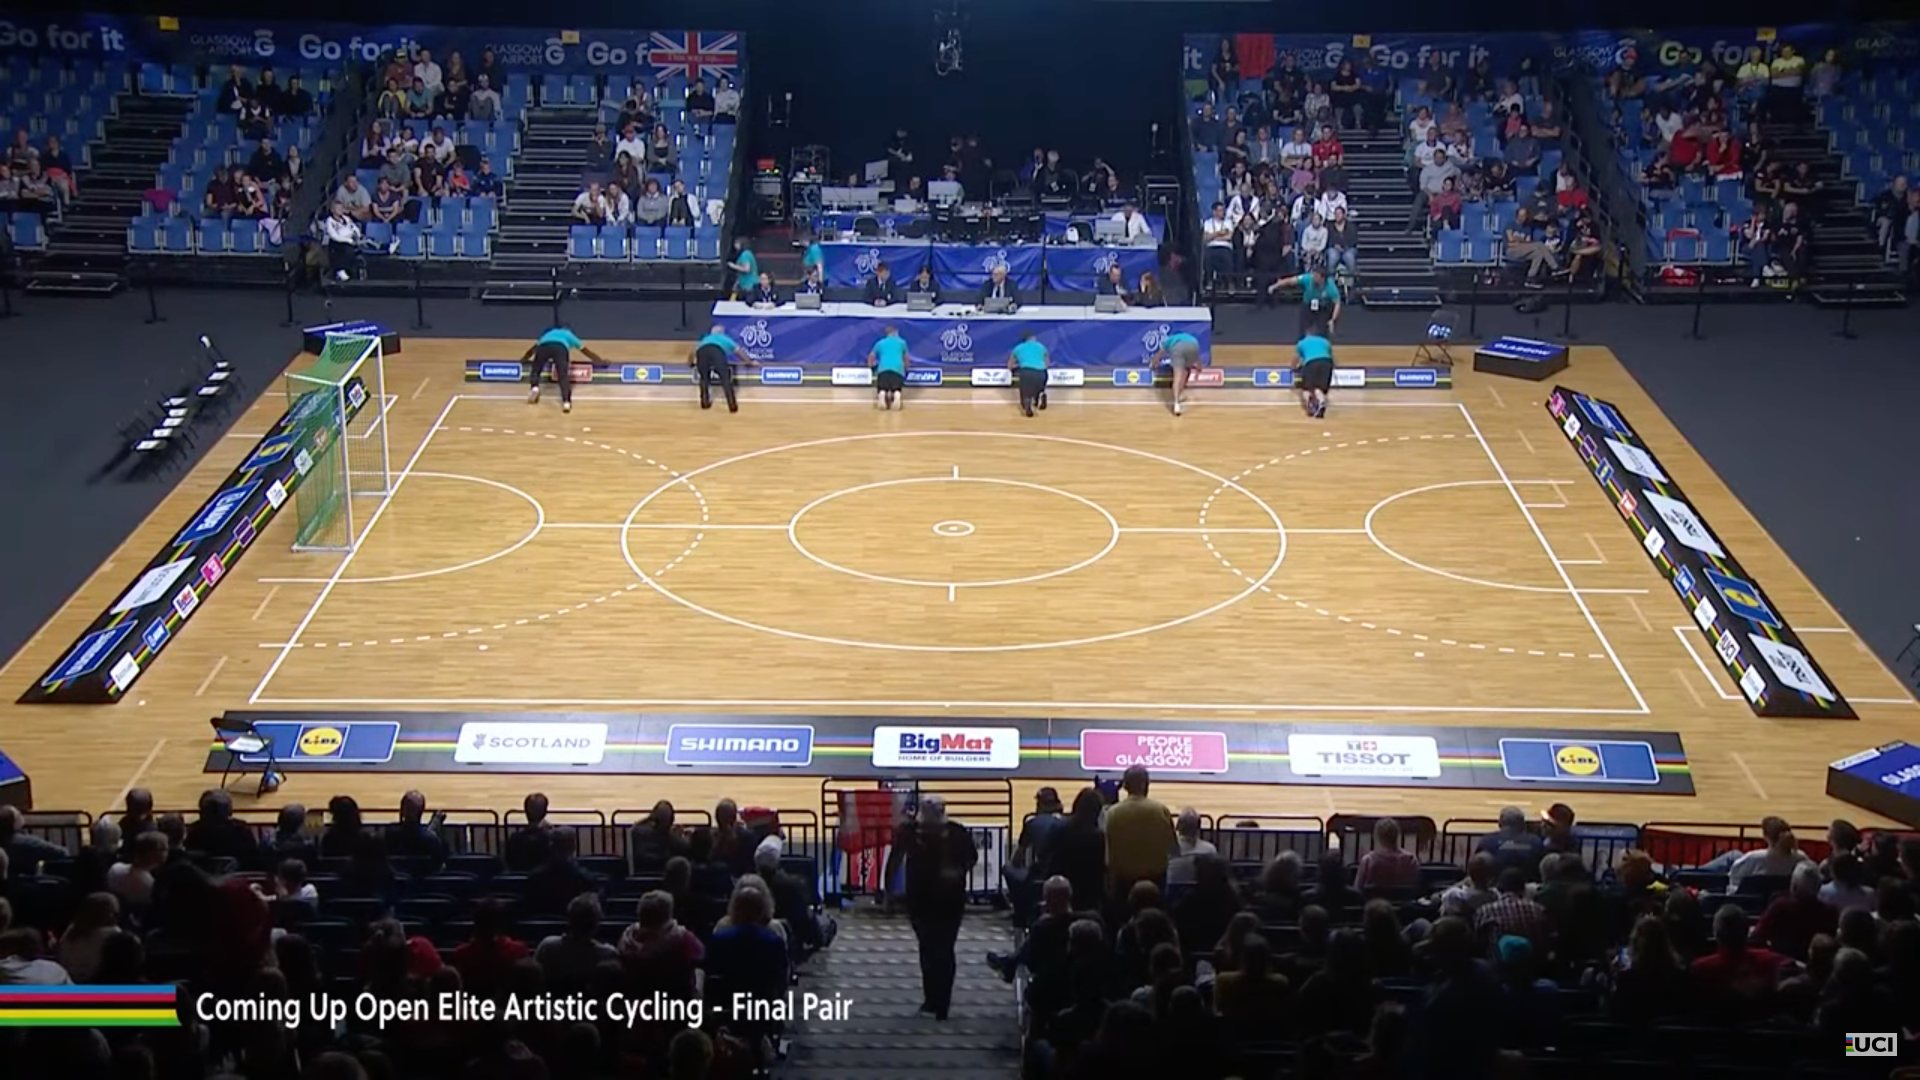 Youtube screenshot of Glasgow 2023 volunteers preparing the artistic cycling playing field.